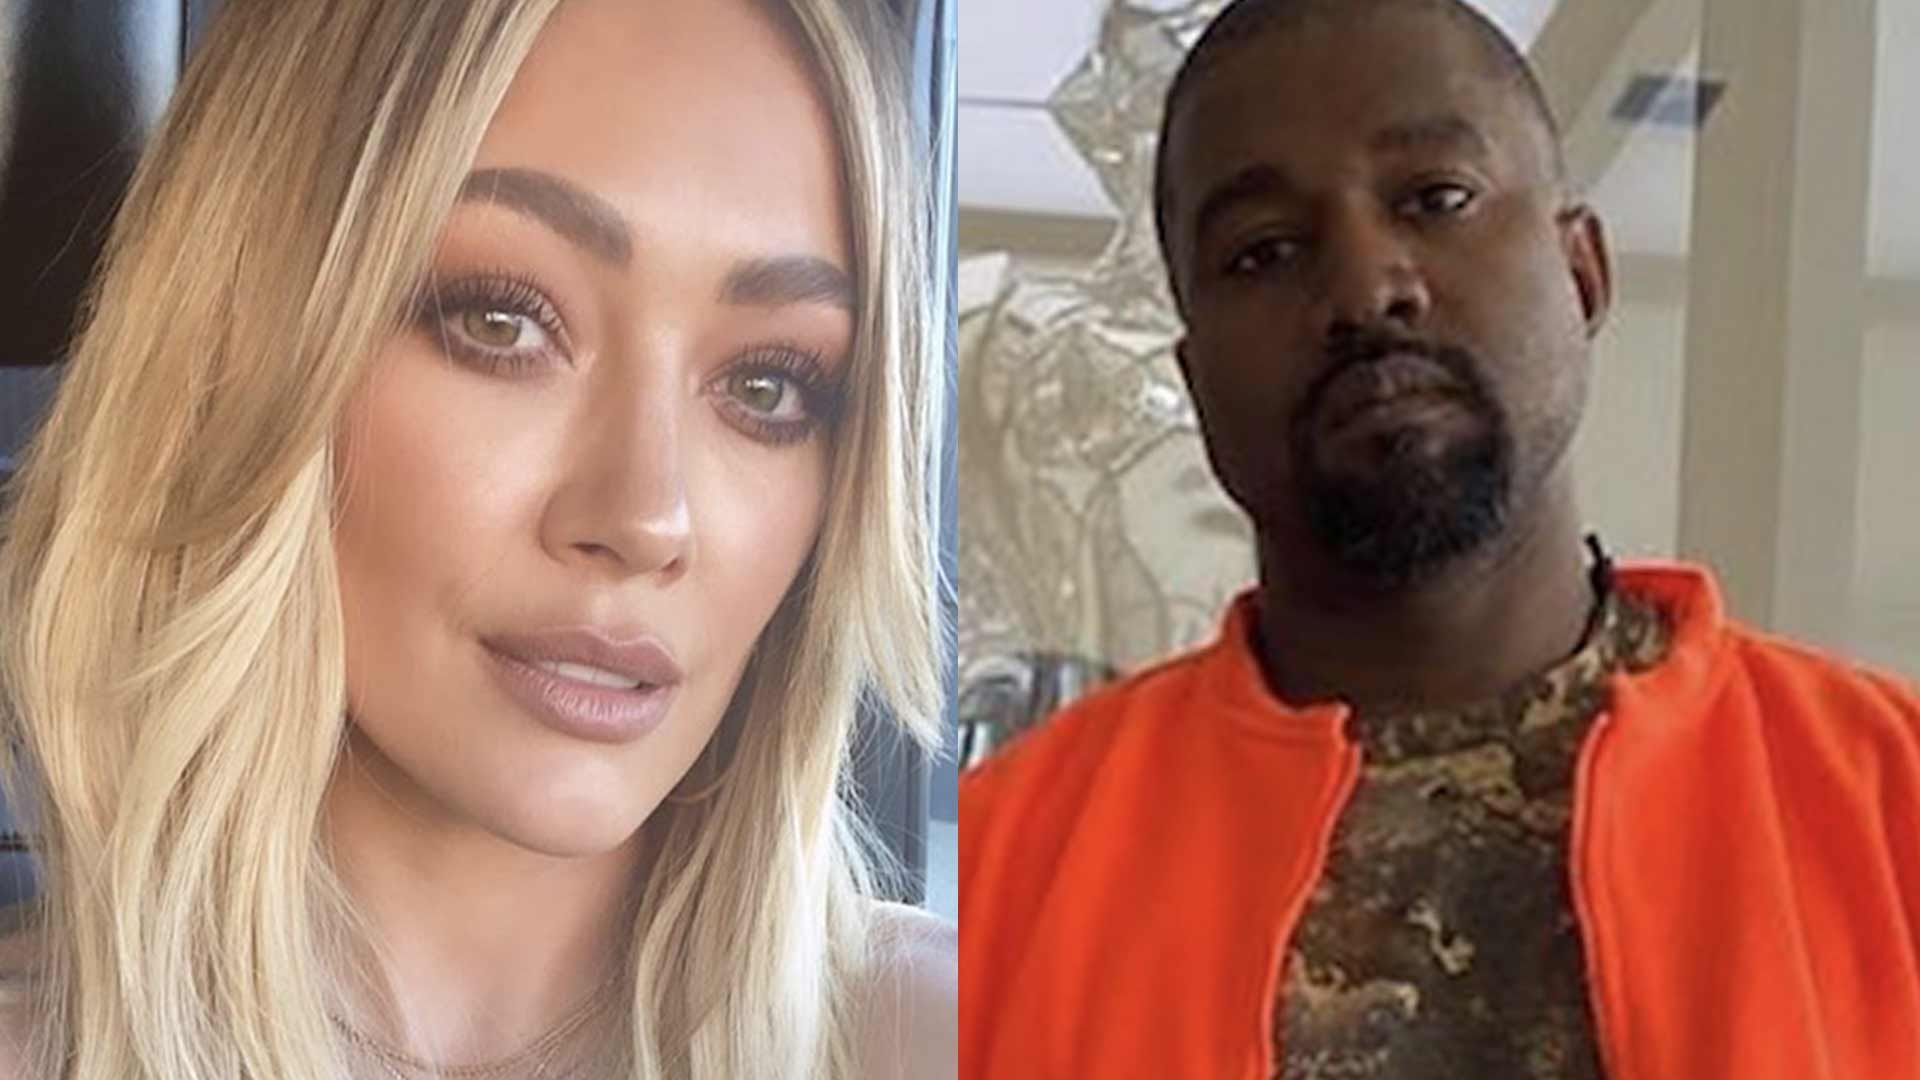 Hilary Duff Shemale Porn - Hilary Duff Takes Shot At Kanye West After Presidential Announcement